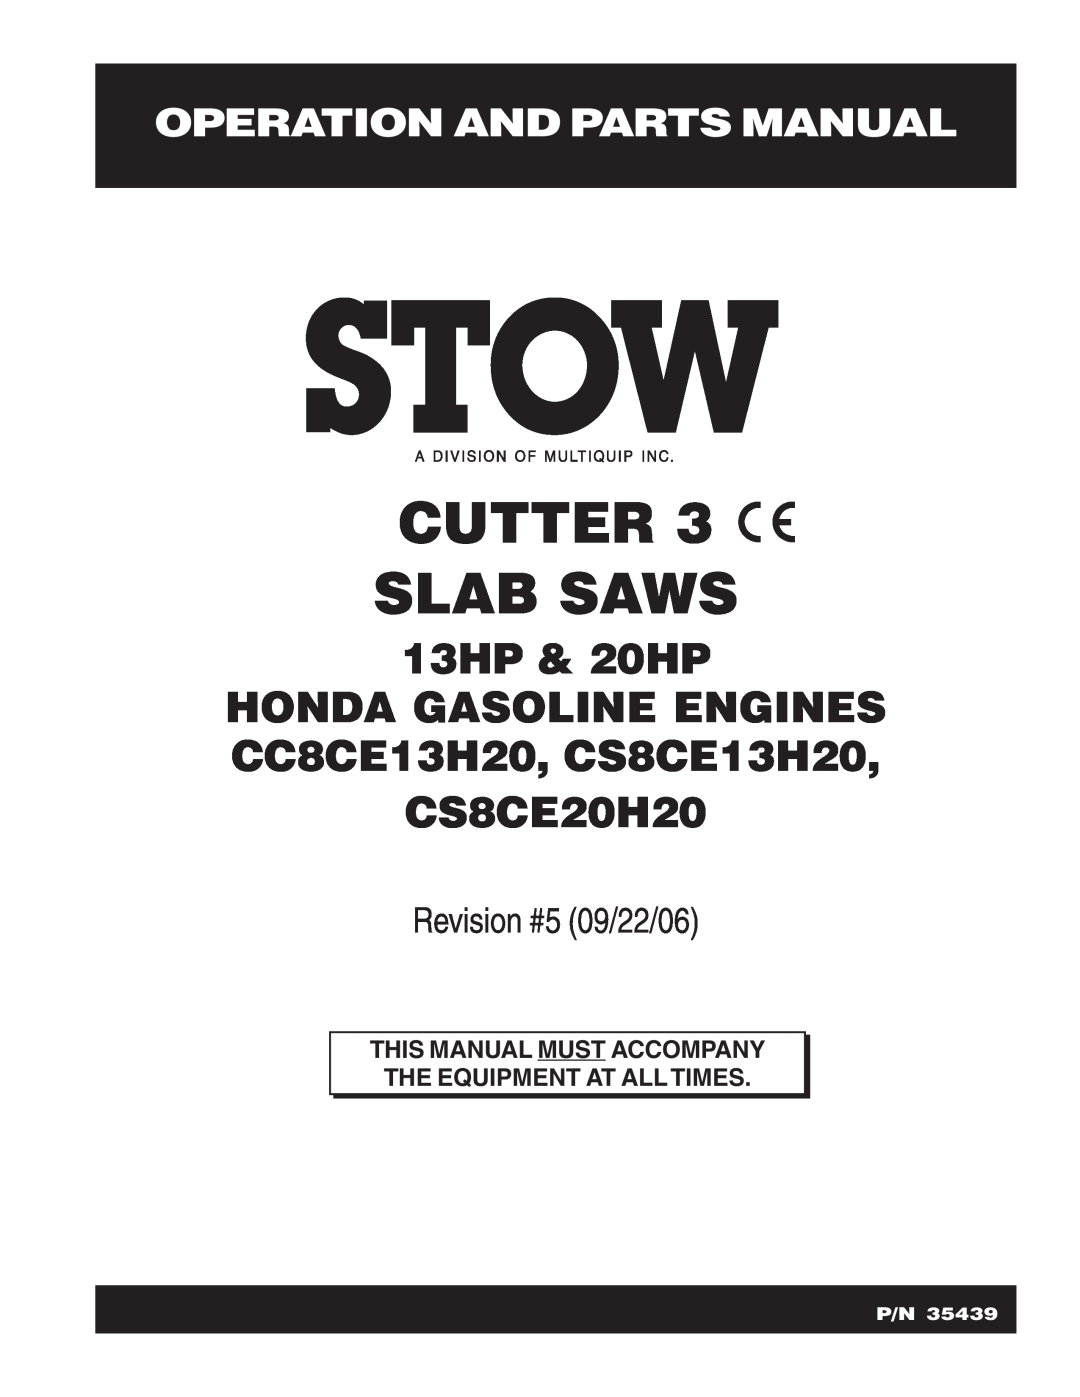 Stow 13HP, 20HP manual Operation And Parts Manual, Cutter Slab Saws, Revision #5 09/22/06 